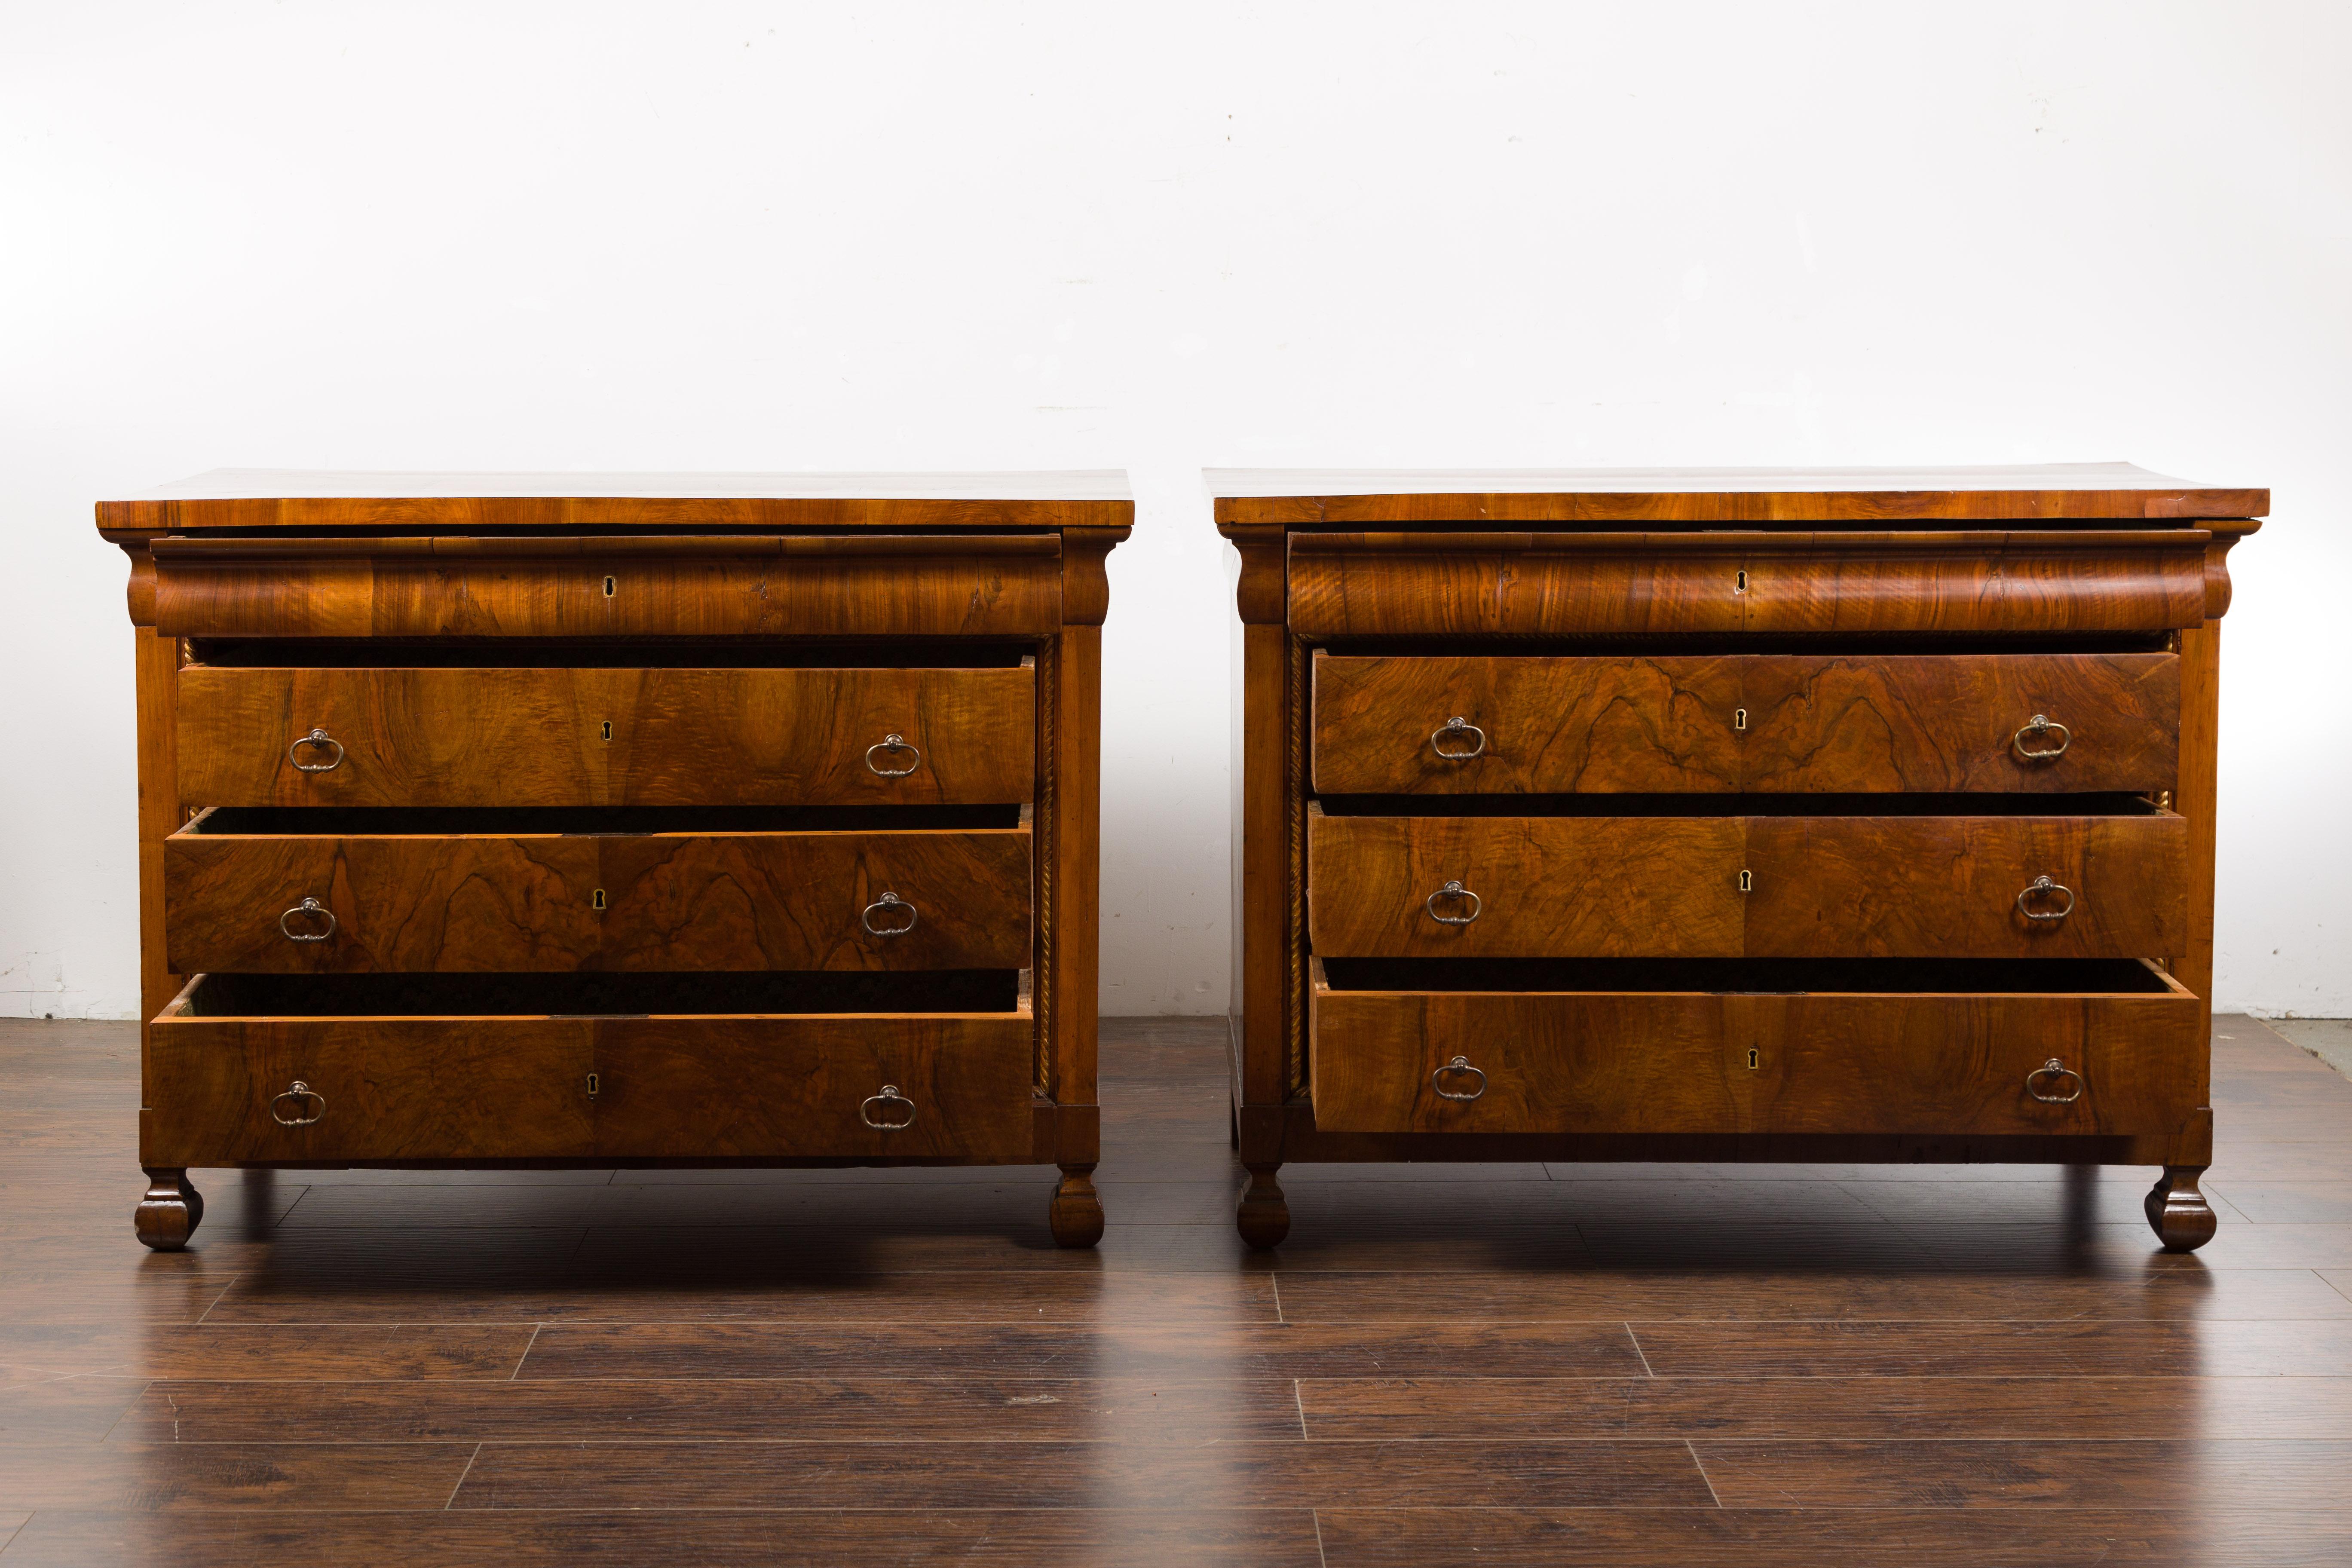 Pair of Italian 18th Century Walnut Four-Drawer Commodes with Bookmatched Veneer For Sale 5